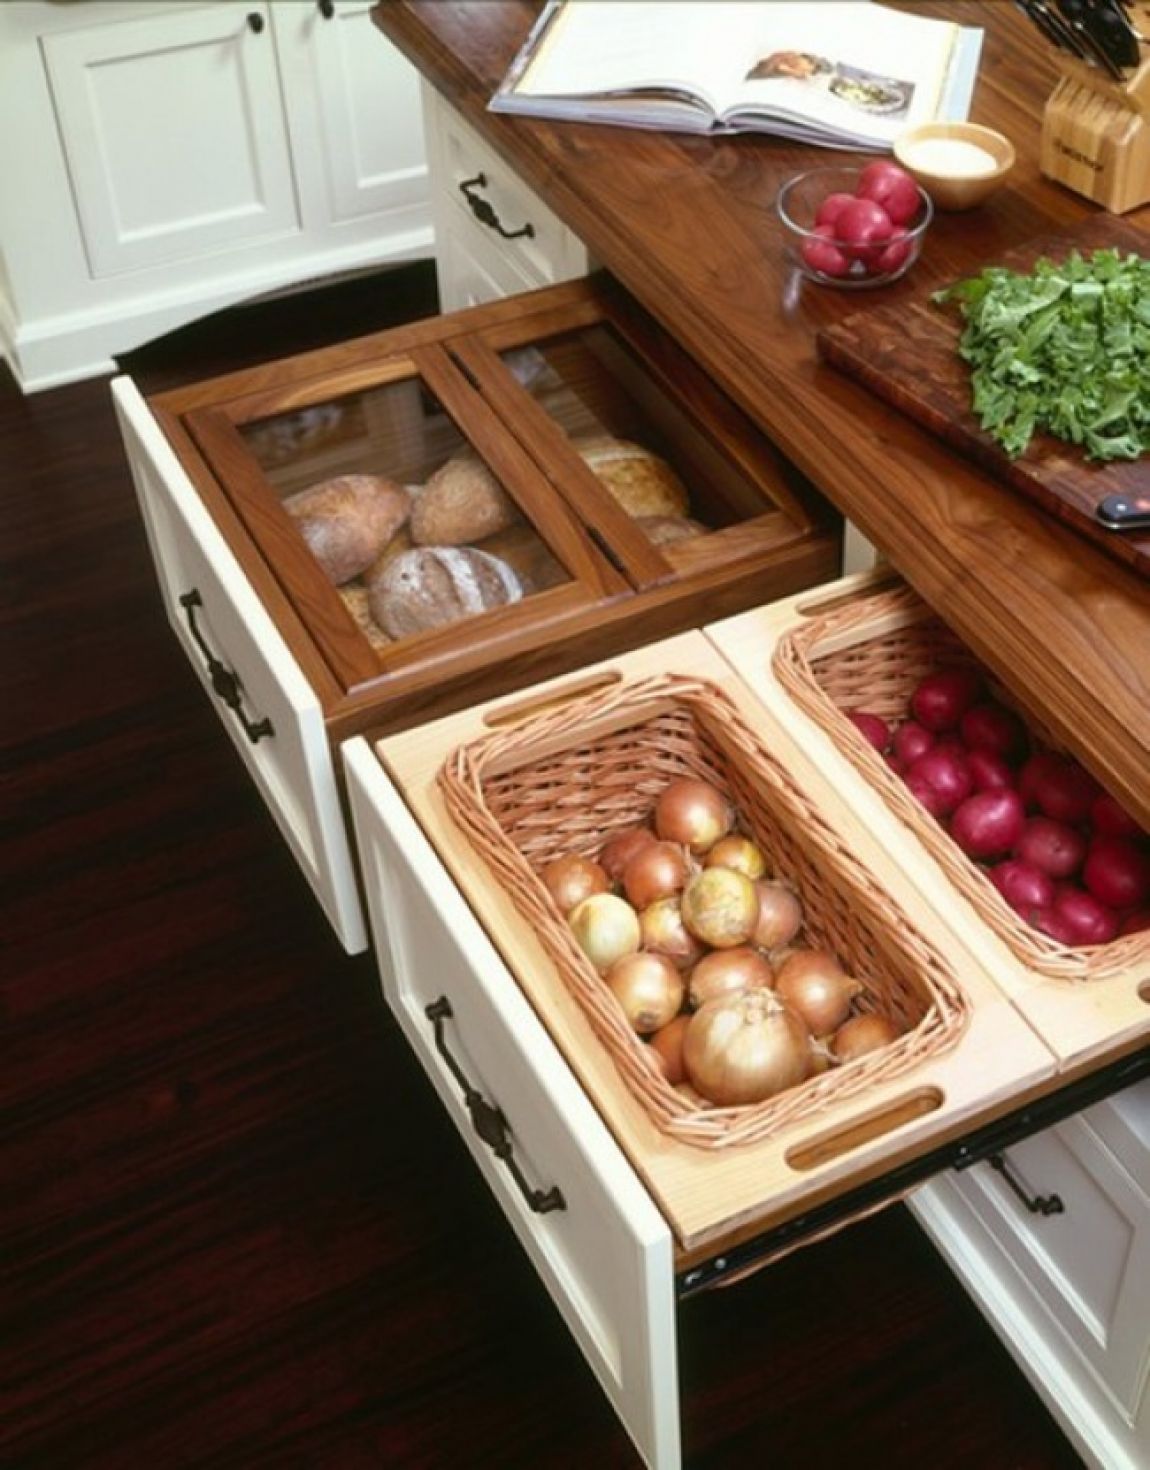 Cut Out Slots in Drawers for Hanging Fruit/ Vegetable Baskets